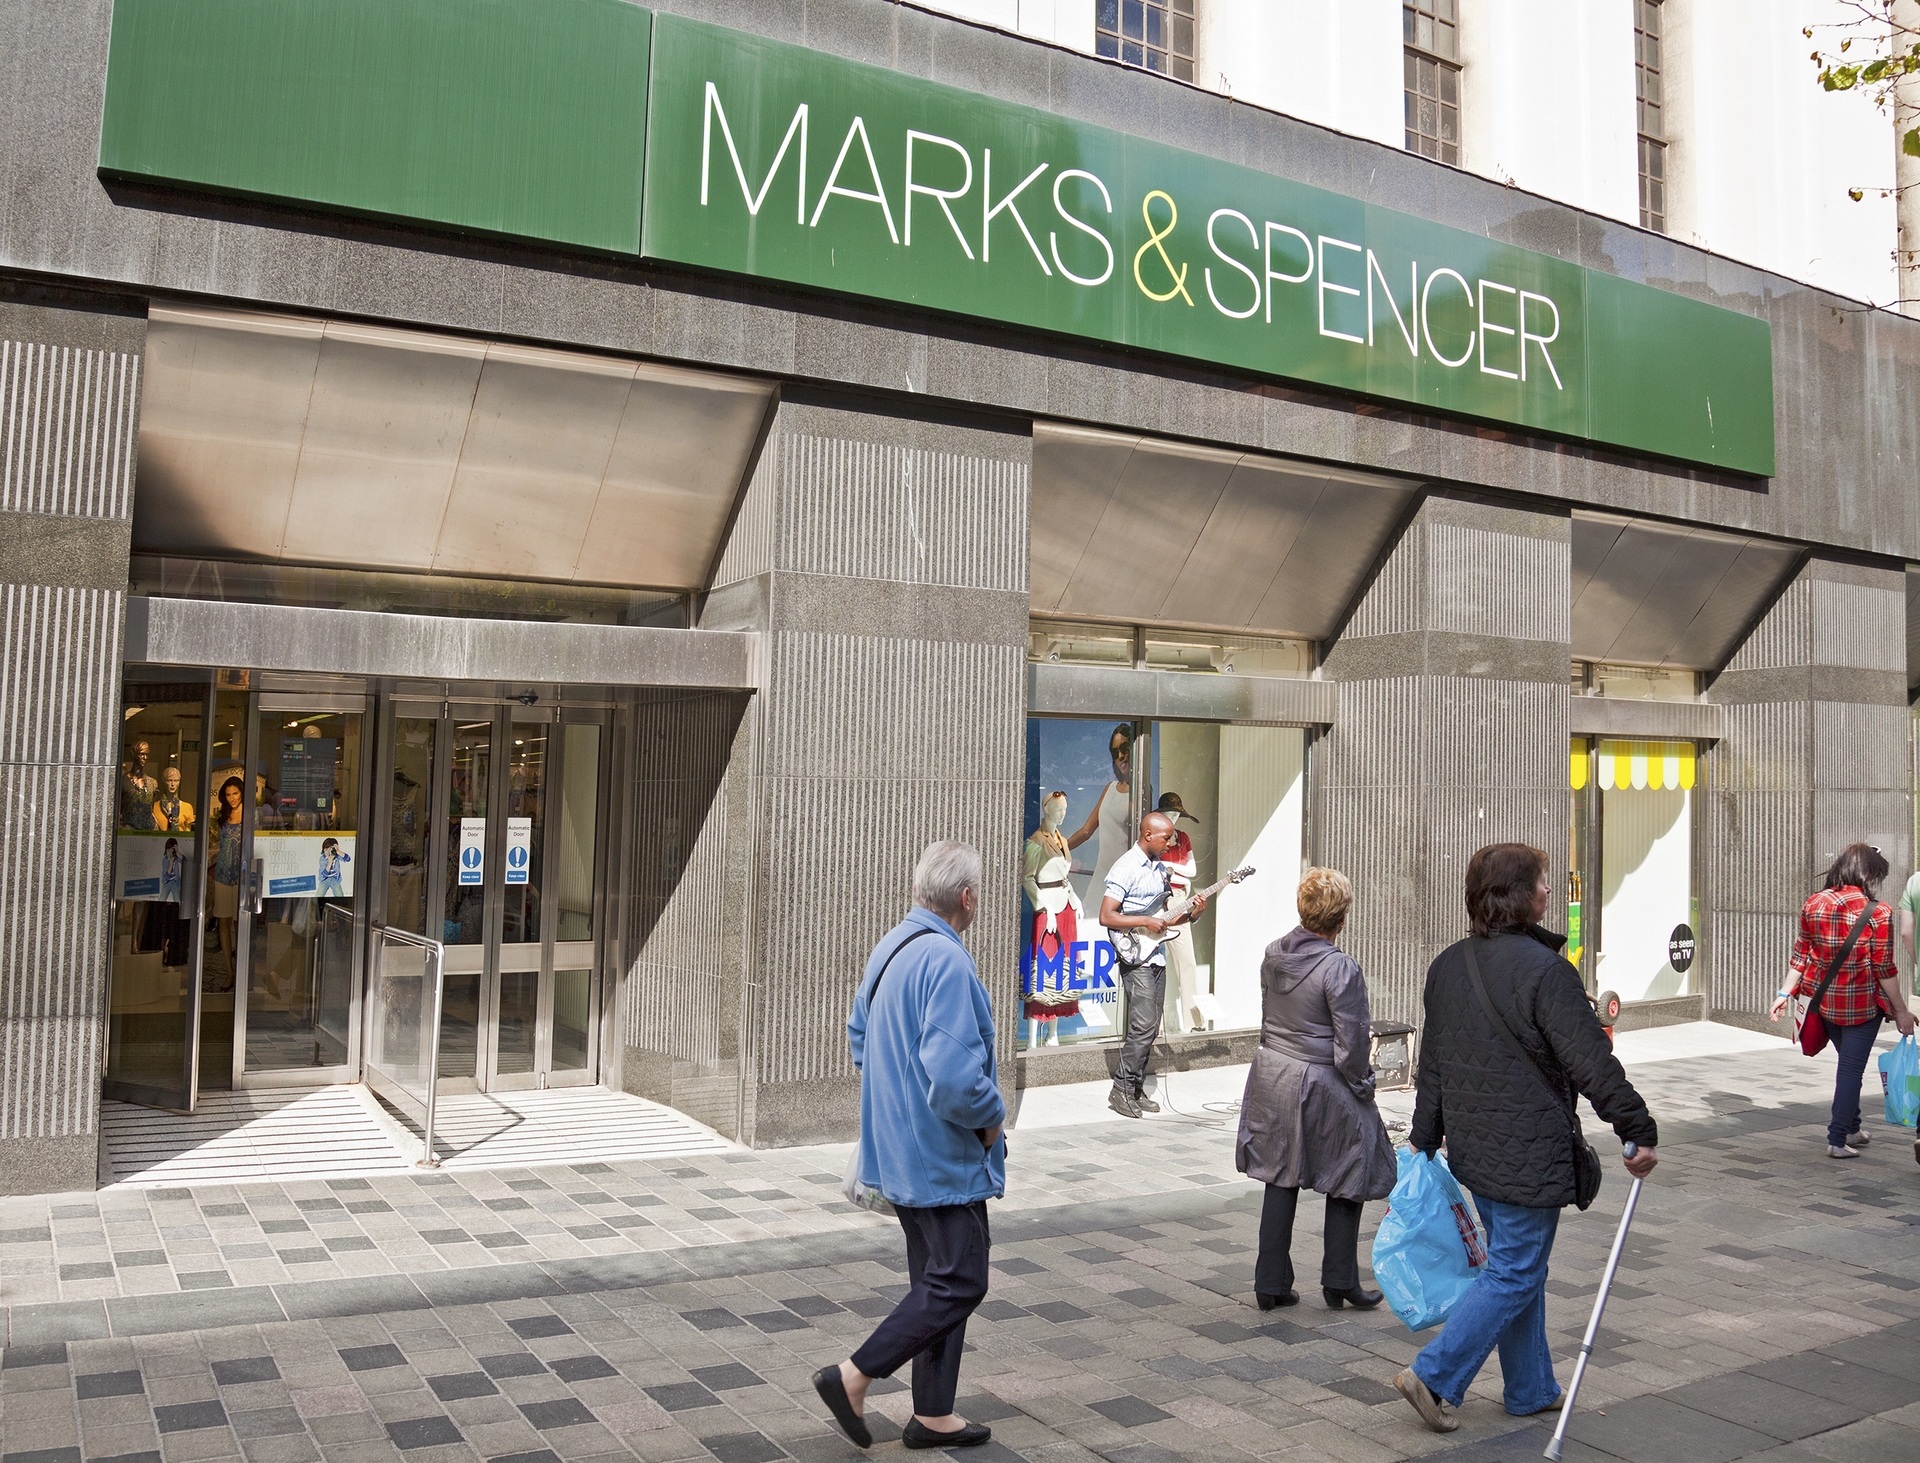 Main entrance and frontage of the former Marks and Spencer shop on Sauchiehall Street in 2011.